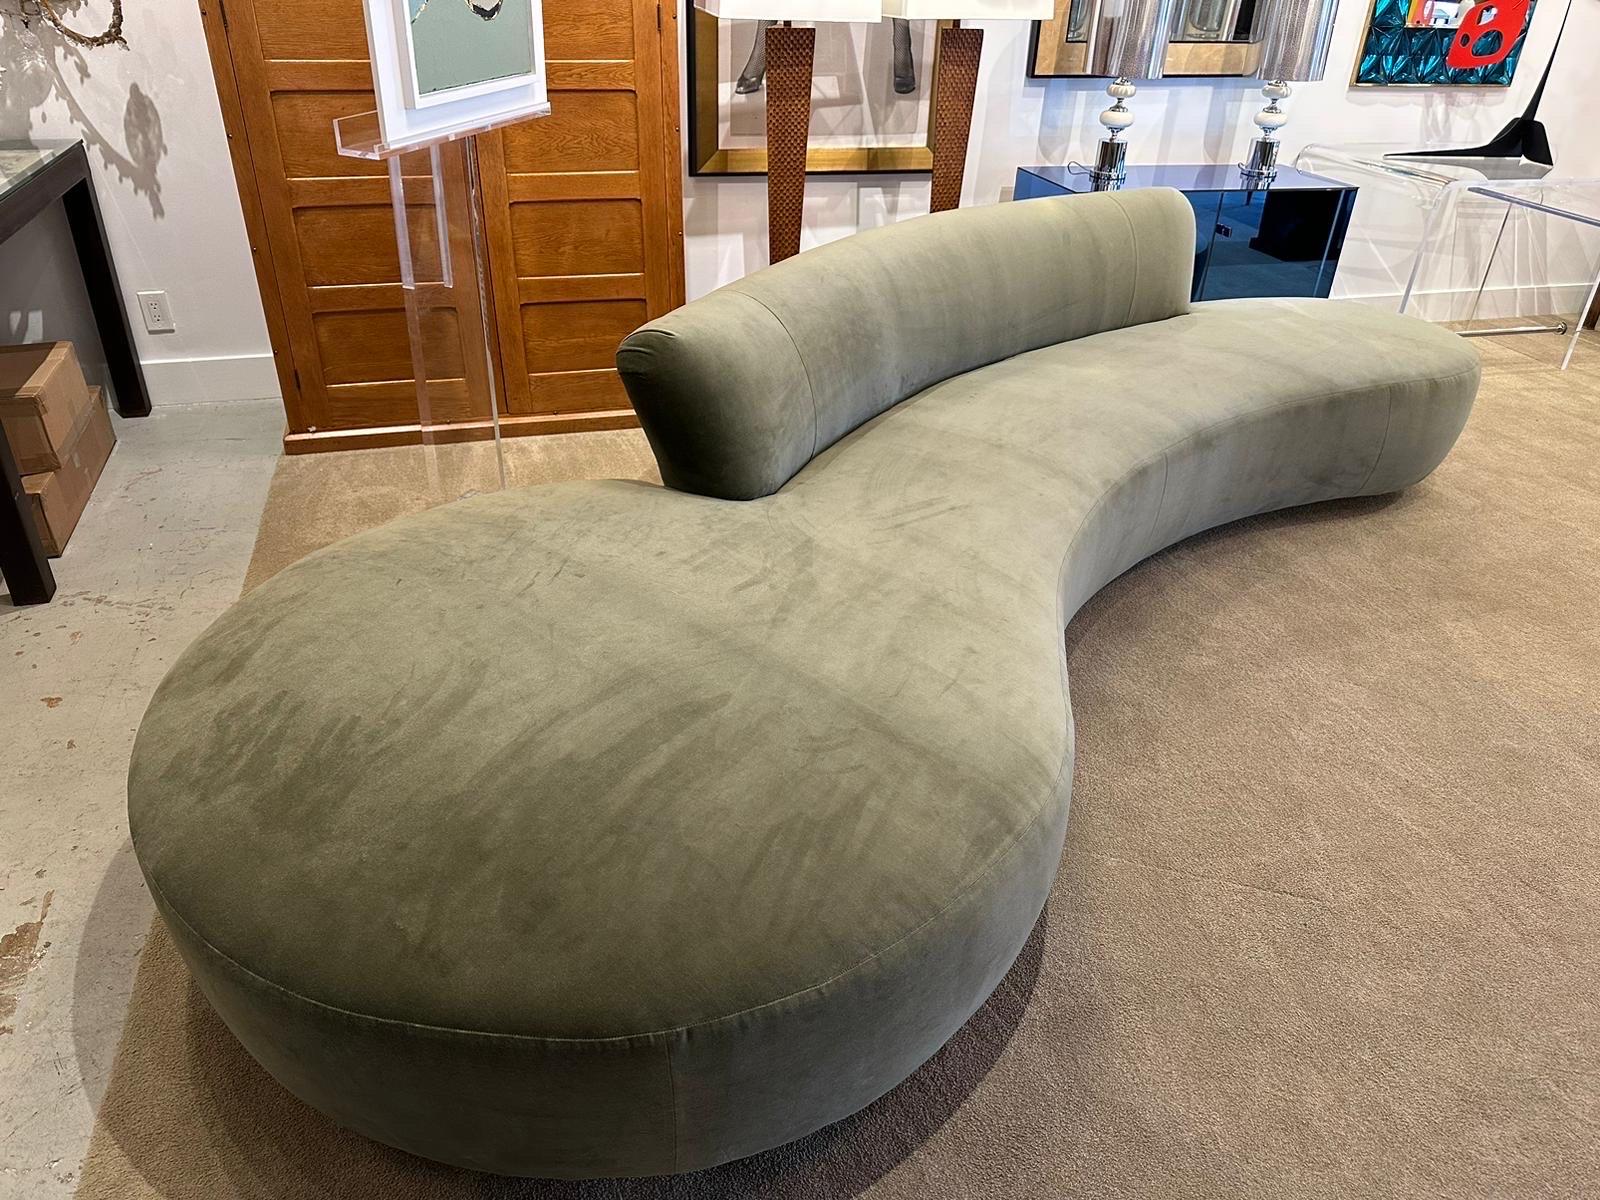 Extra Long Serpentine Style Sofa in Sage Green Velvet In Good Condition For Sale In East Hampton, NY